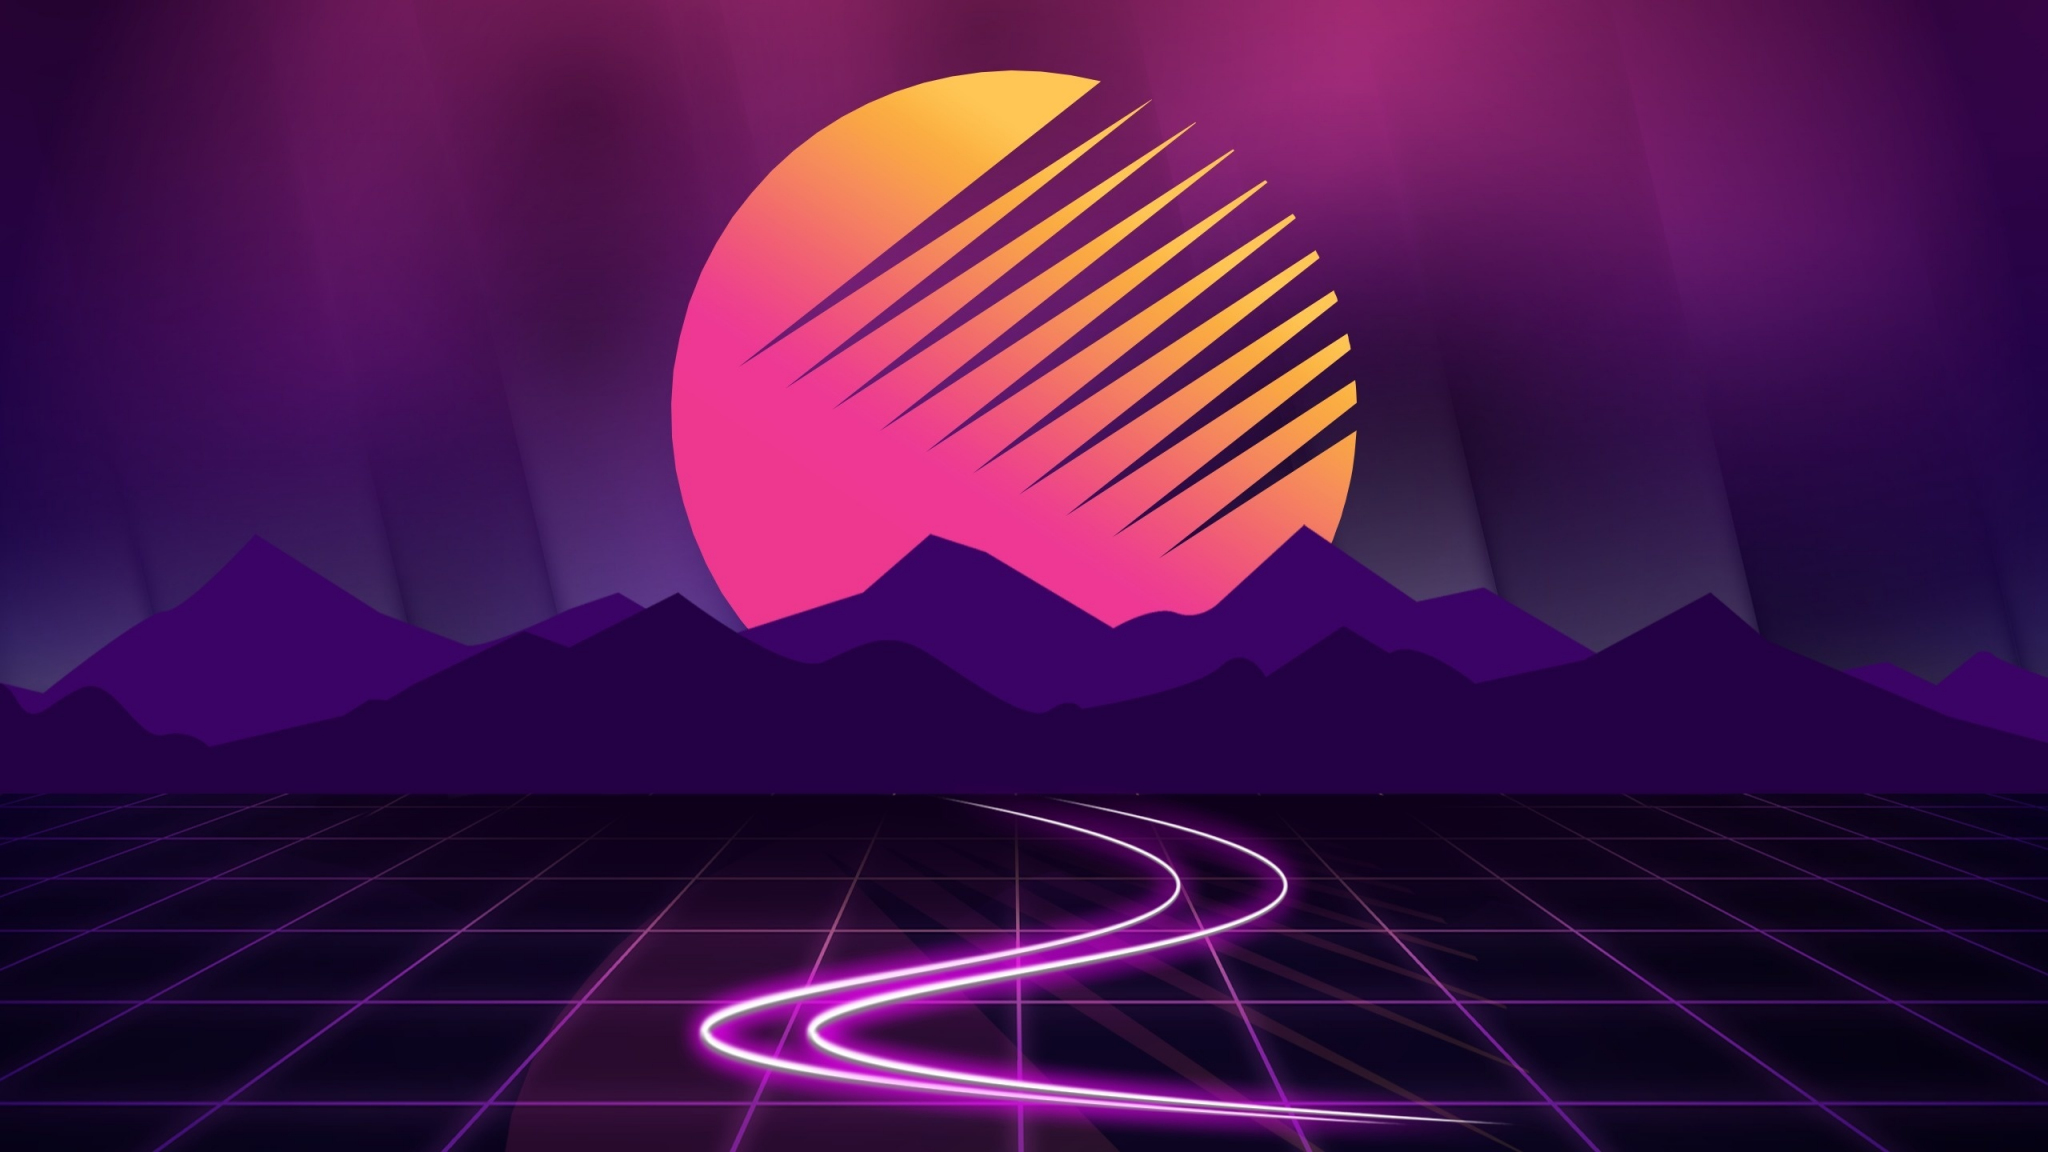 Download 48x1152 Wallpaper Neon Cyberwave Purple Mountains Moon Outrun Dual Wide Widescreen 48x1152 Hd Image Background 6356